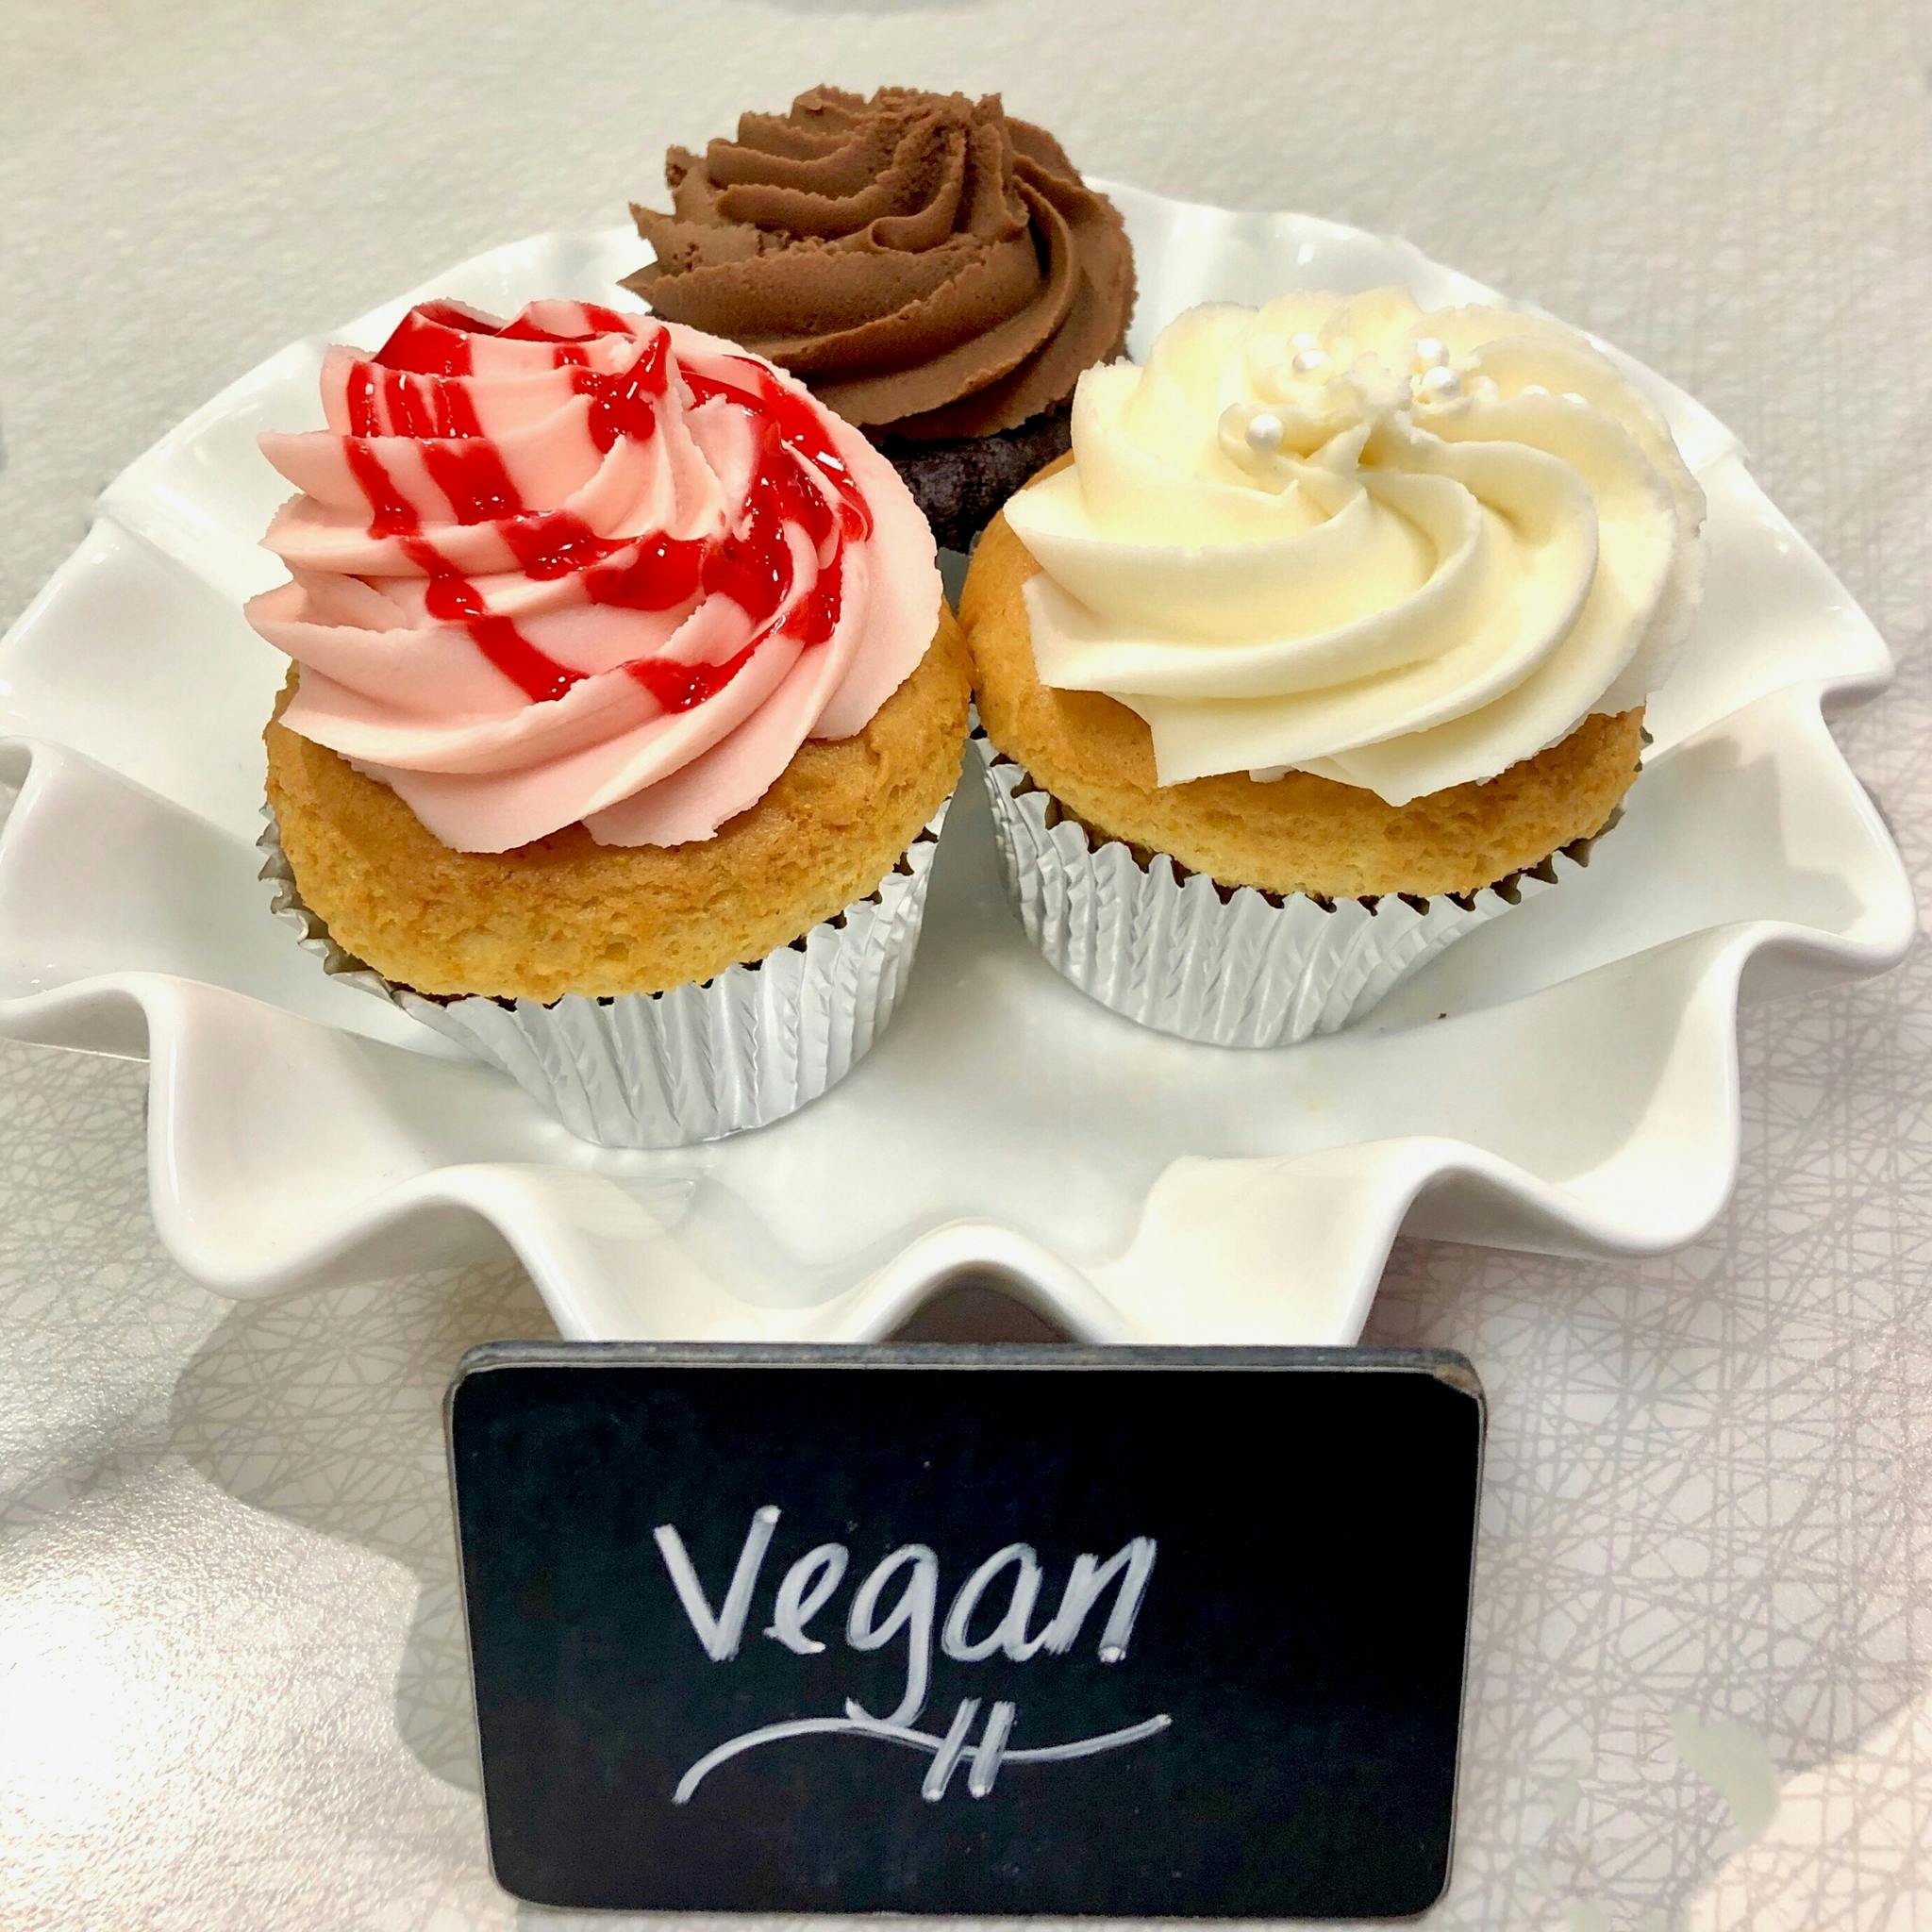 Vegan Cupcakes from Classy Girl Cupcakes - Jefferson St in Milwaukee, WI